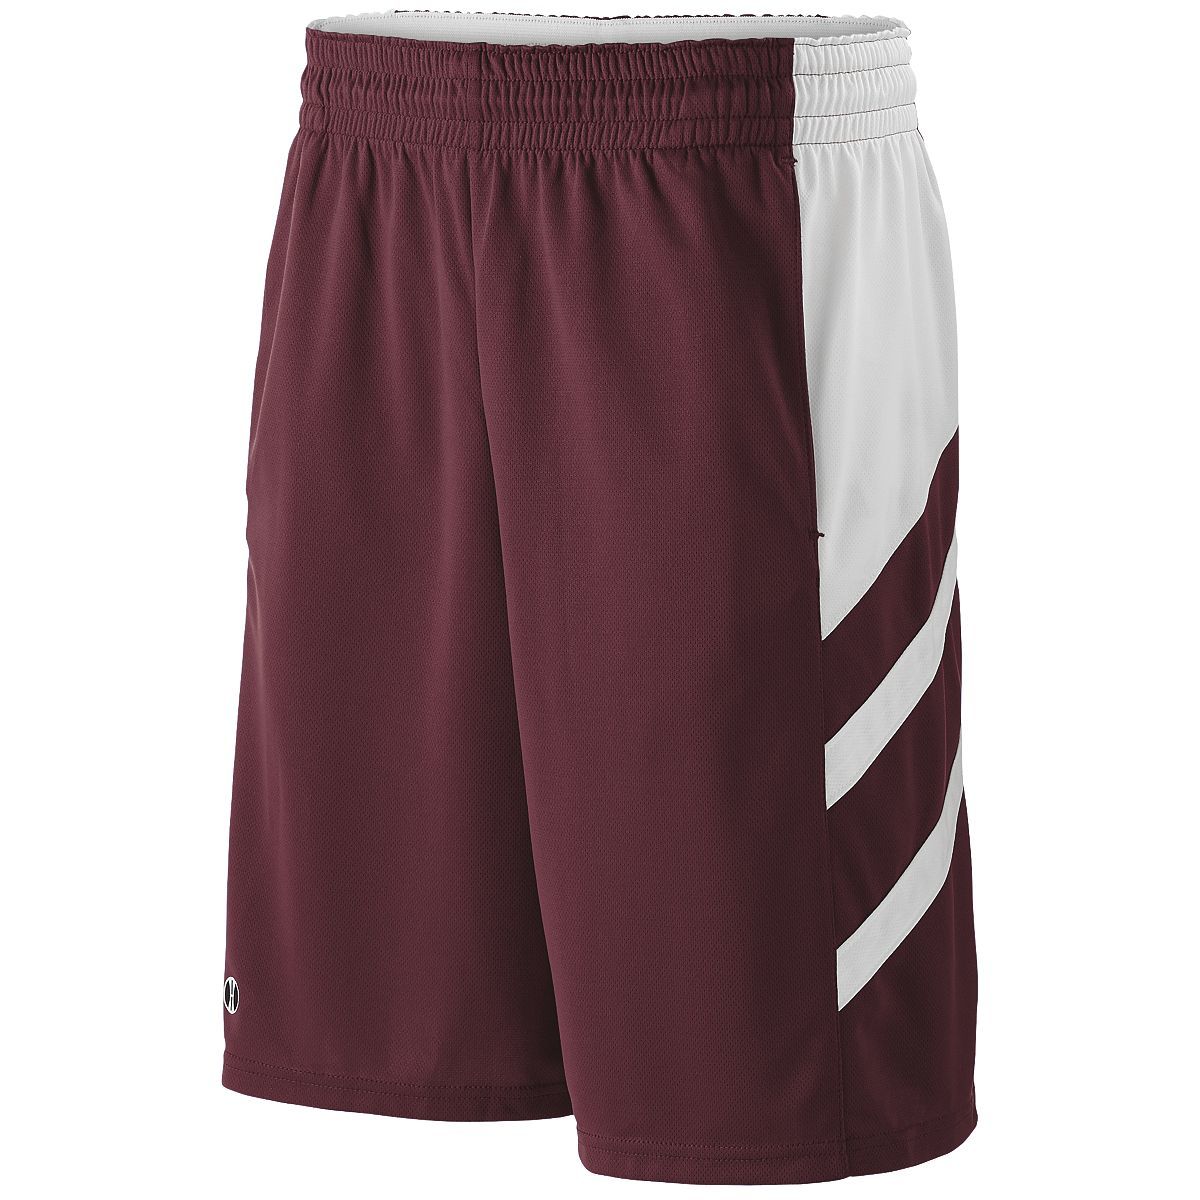 Holloway Helium Shorts in Maroon/White  -Part of the Adult, Adult-Shorts, Holloway product lines at KanaleyCreations.com